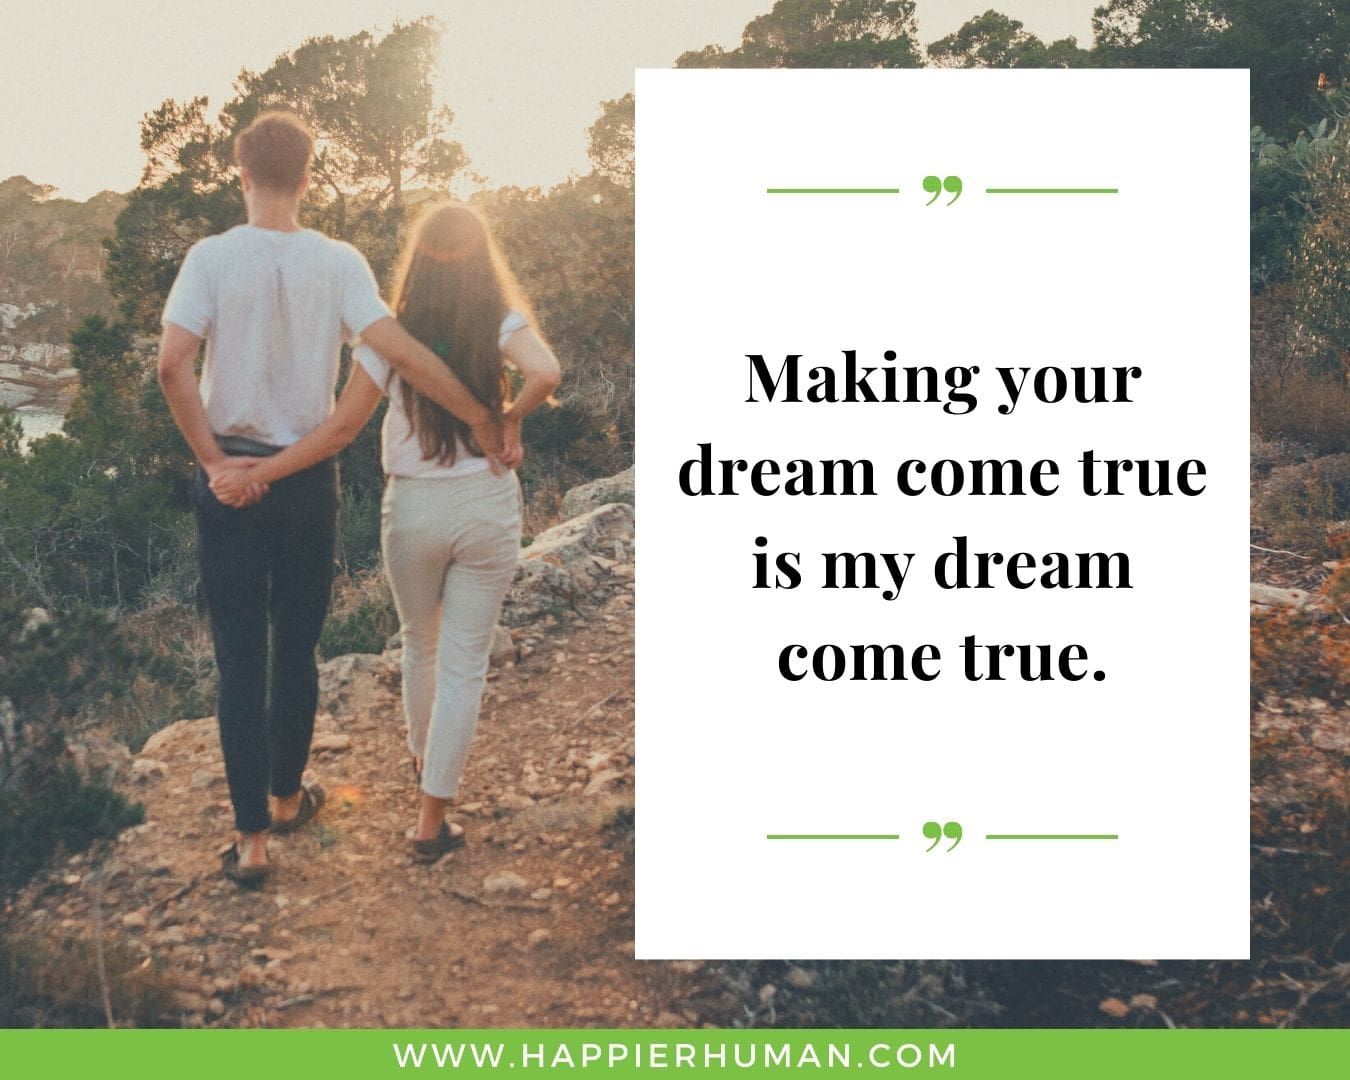 Short, Deep Love Quotes for Her - “Making your dream come true is my dream come true.”